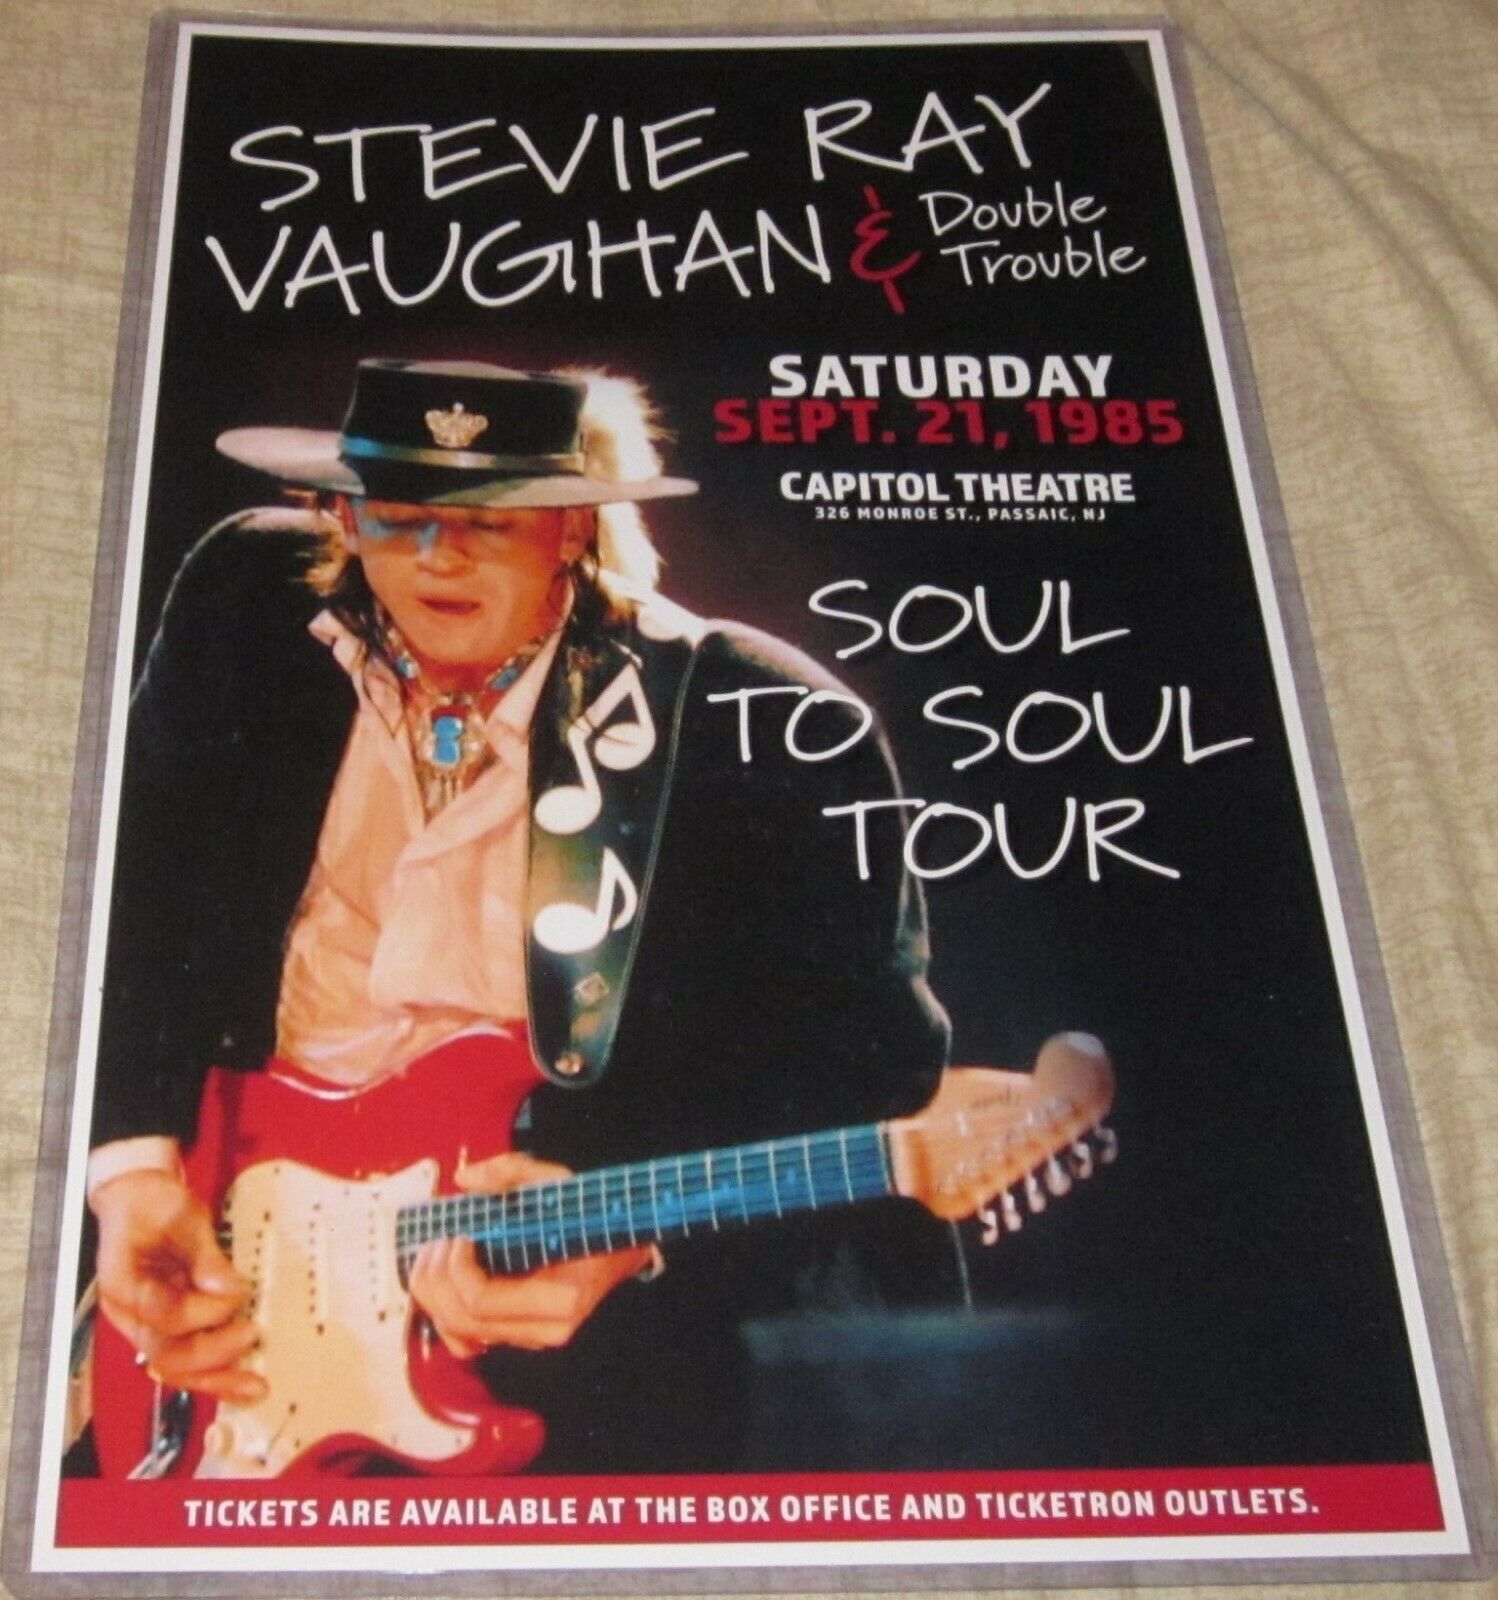 Stevie Ray Vaughan/double Trouble 1985 Capitol Theatre Replica Concert Poster